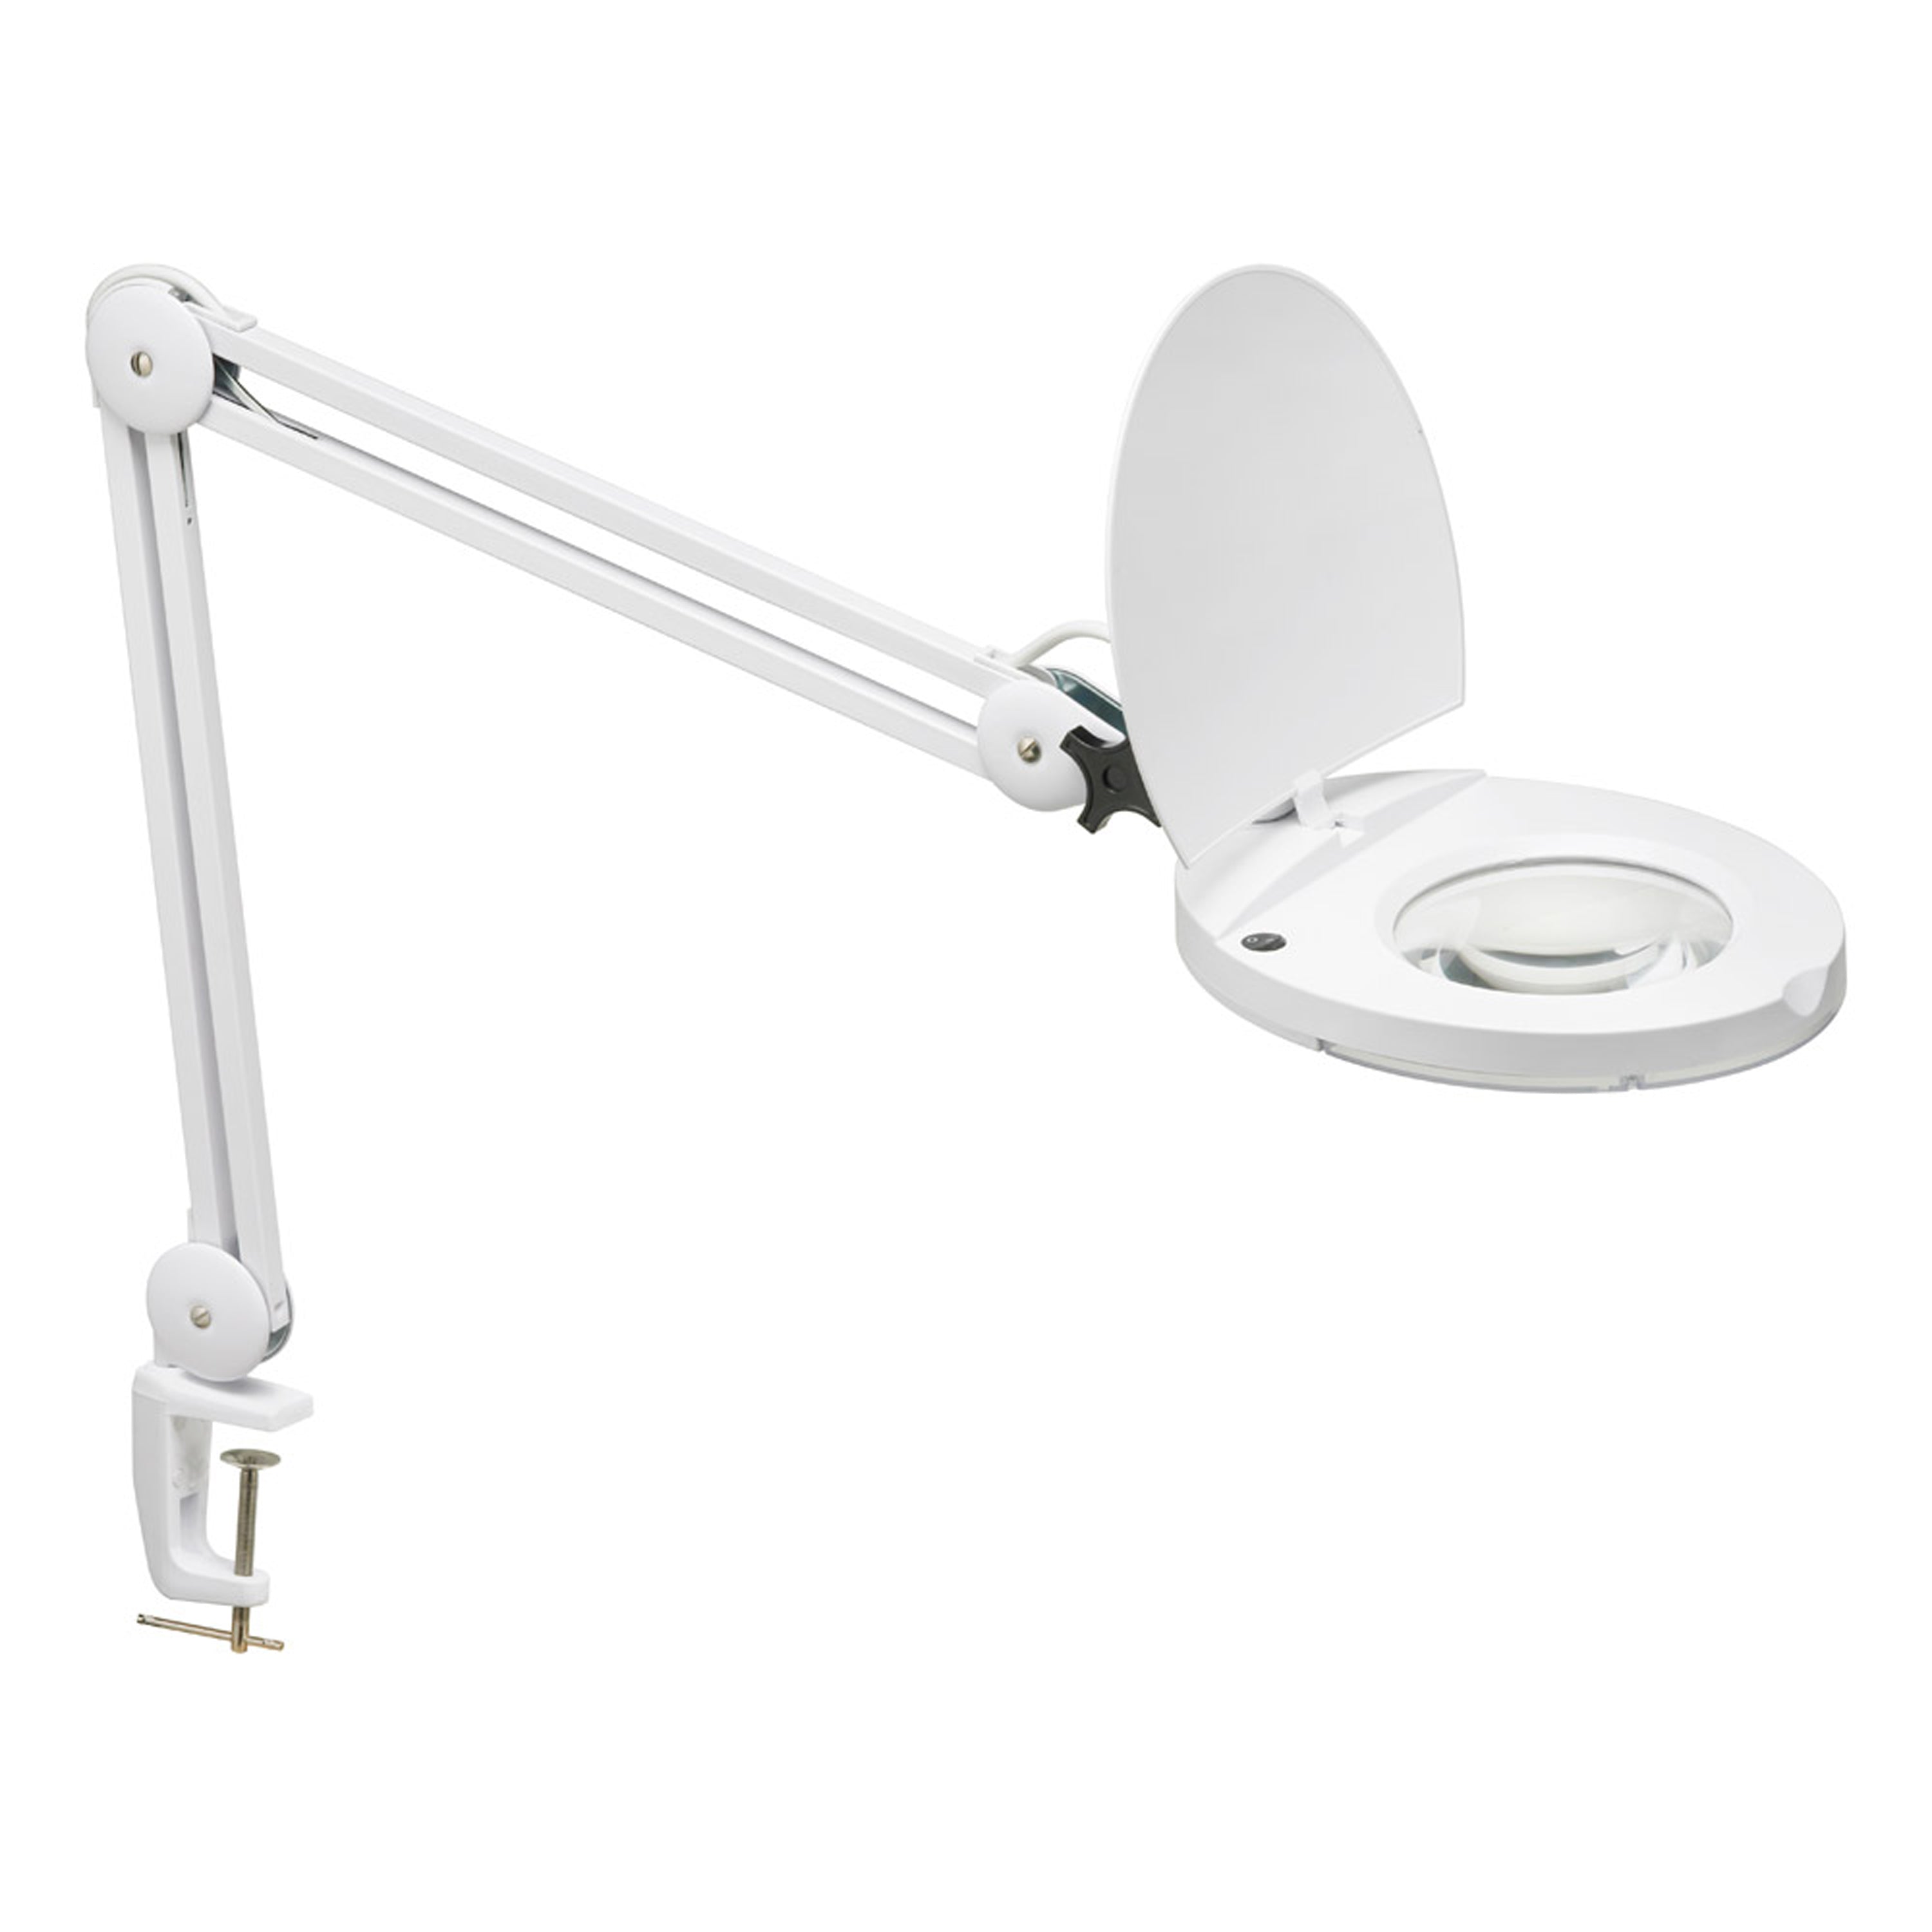 Table lamp White INTEGRATED LED - DMLED10-A-5D-WH | DAINOLITE